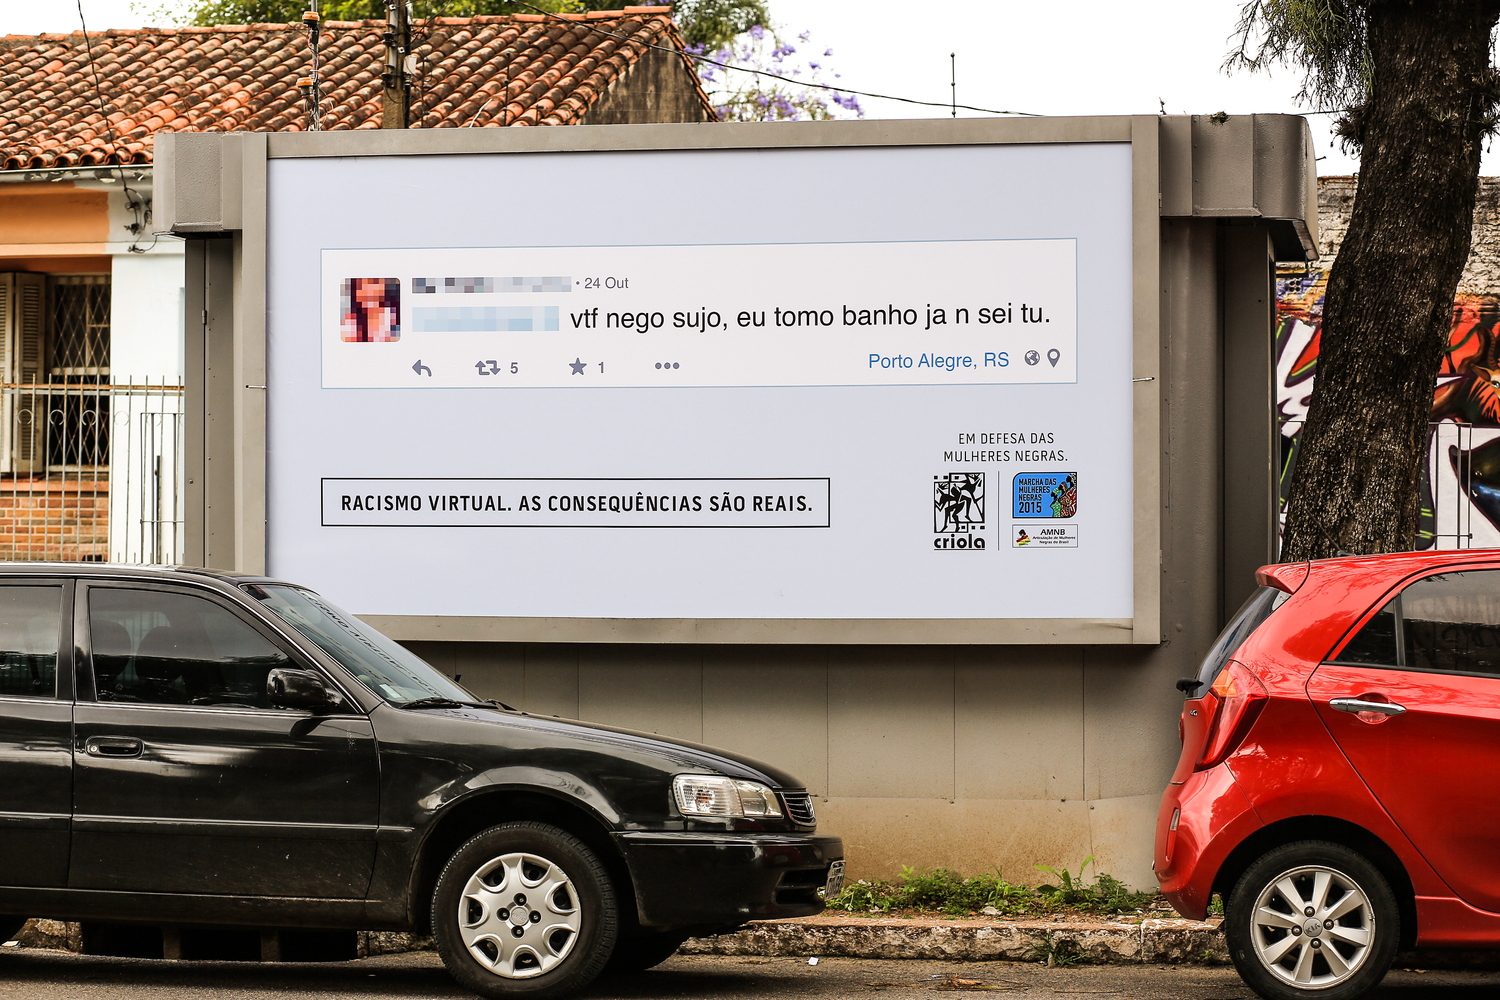 Post a racist comment online, see it on a billboard near your house